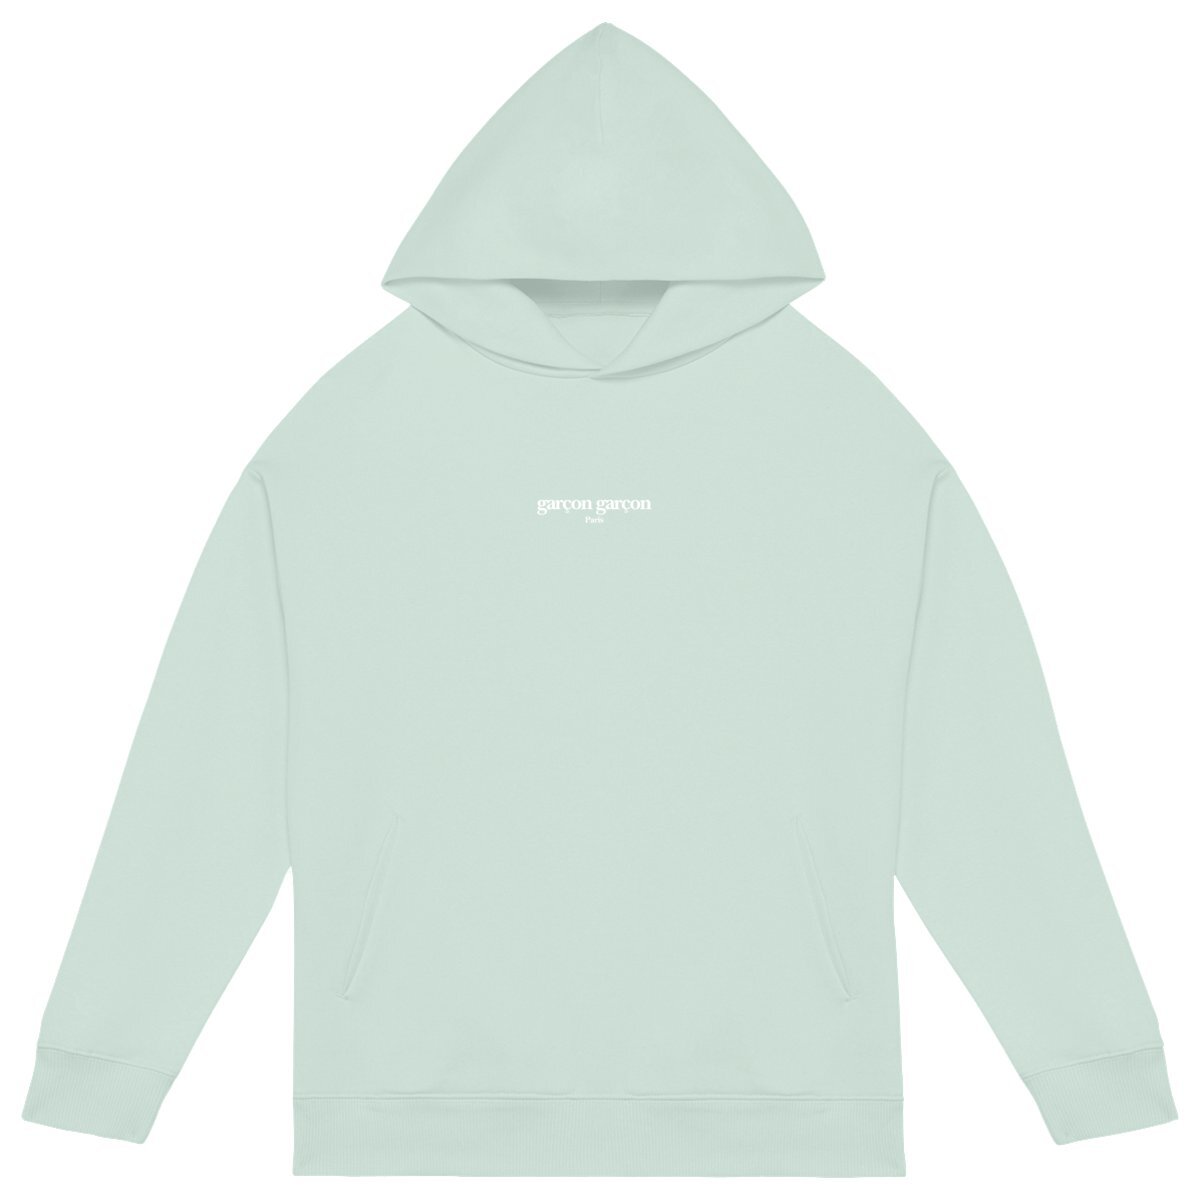 garçon garçon essentiel oversized hoodie. Sleek in green mint and whispering Parisian chic, this hoodie is the sartorial whisper of 'garçon garçon' — a statement of understated elegance. Perfect for those who carry a piece of Paris in their hearts and a touch of audacity on their sleeves.